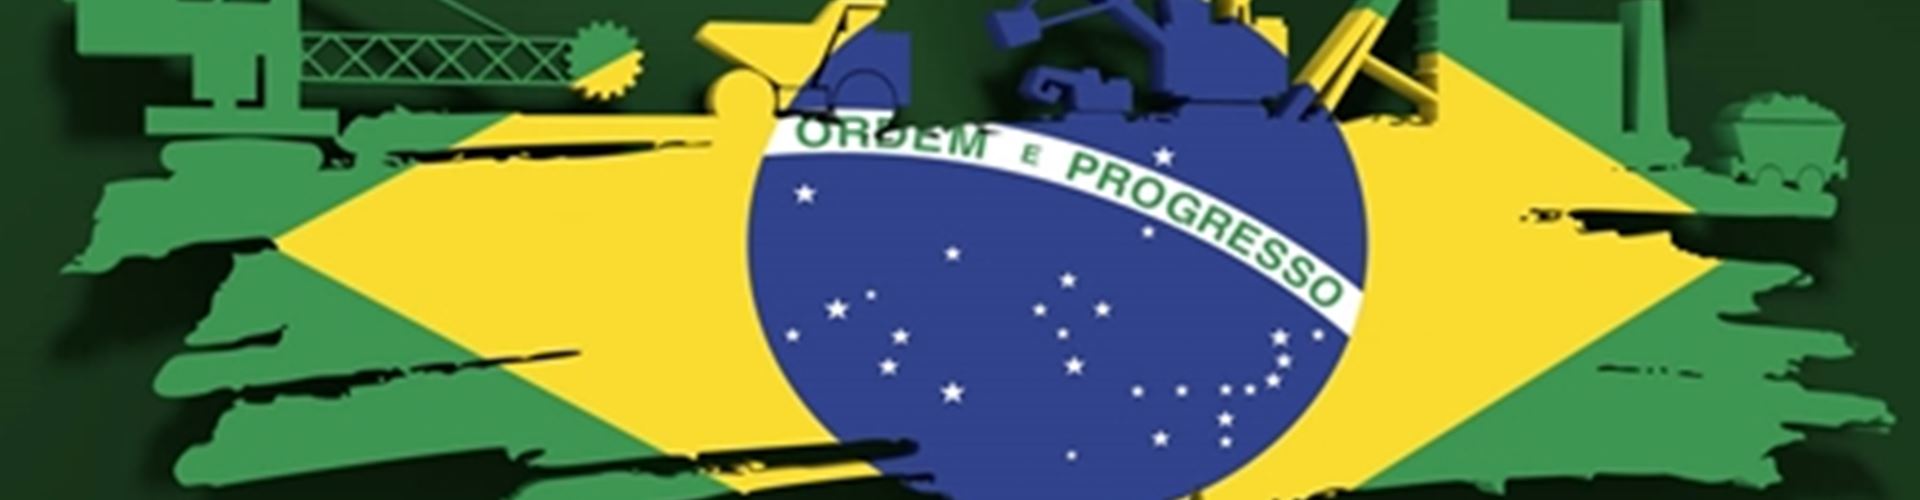 London School of Business and Finance signs MoU with Trevisan to bring international programmes to Brazil